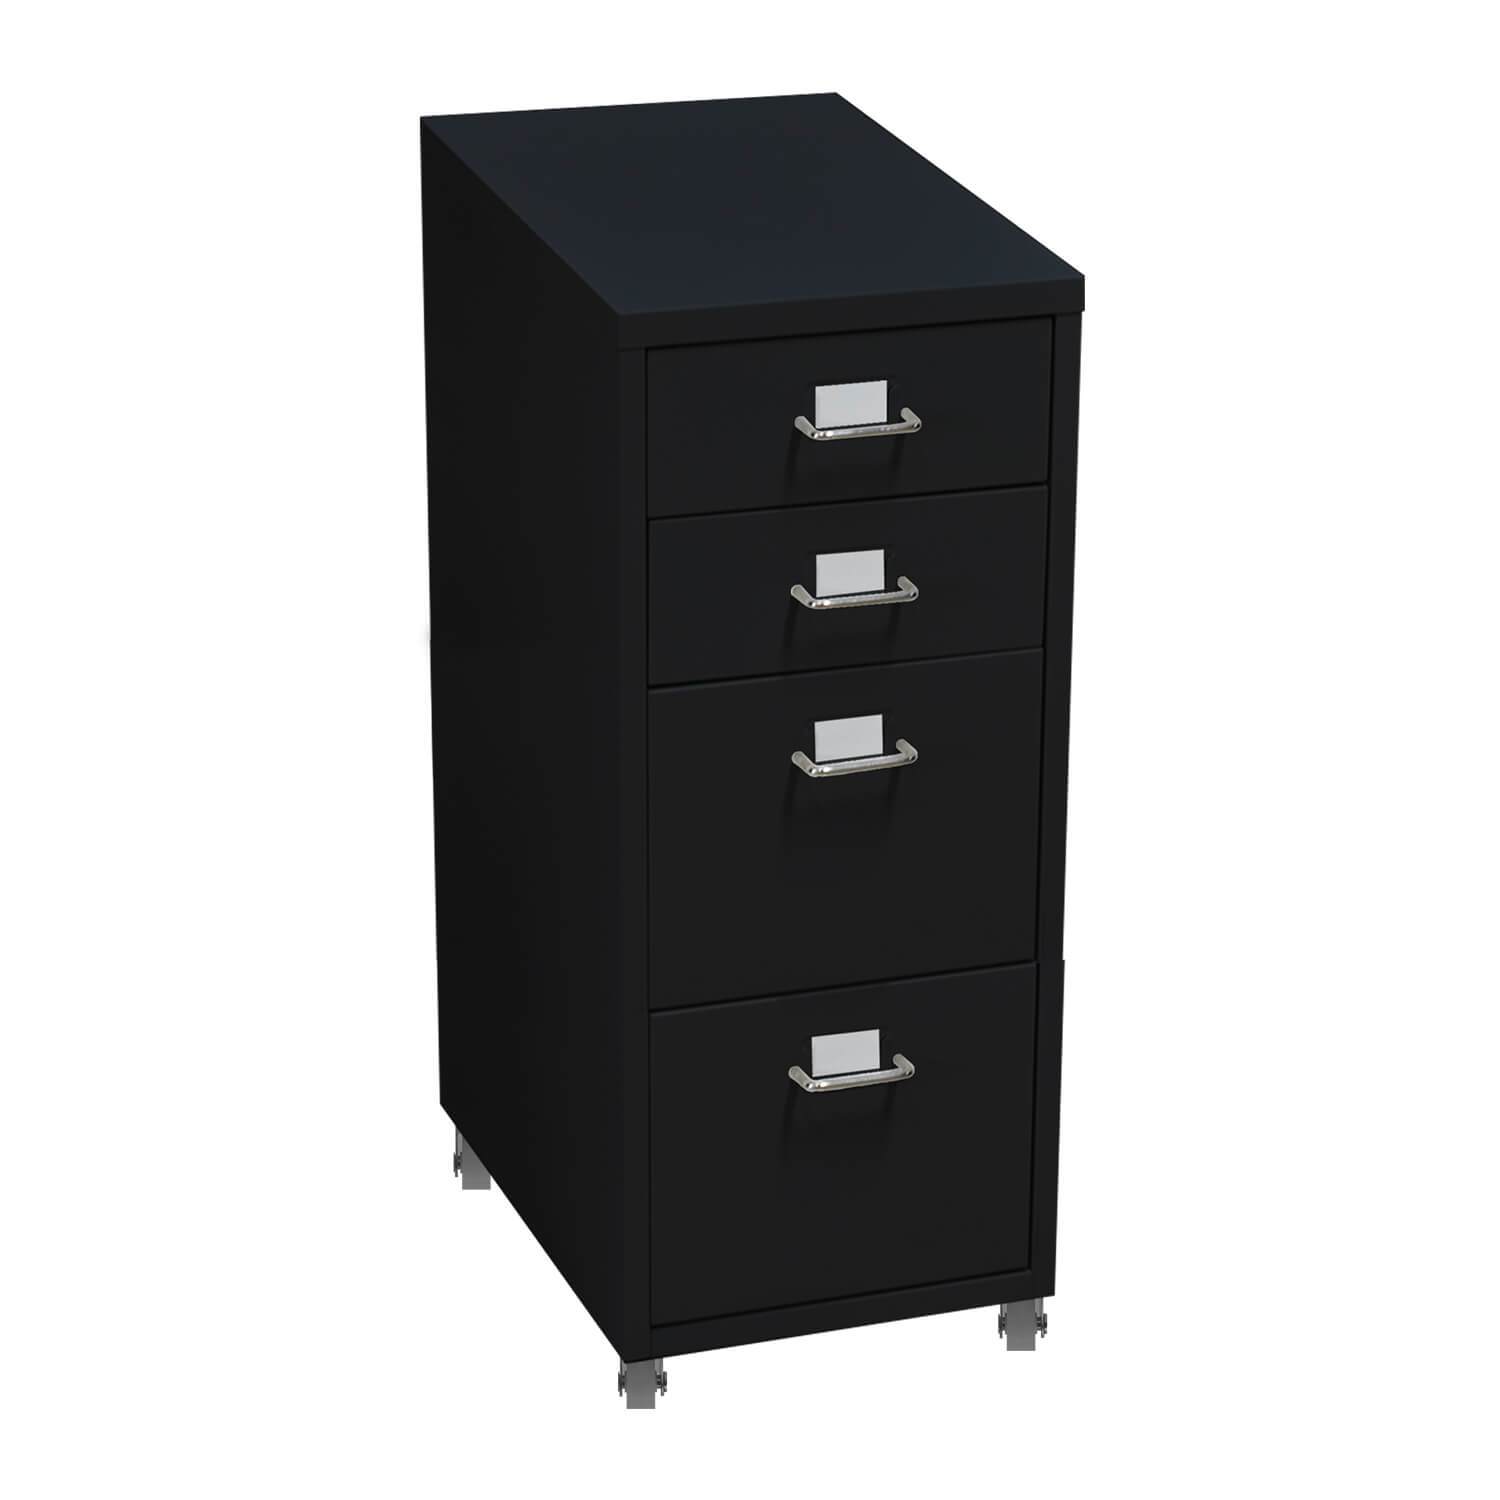 office & study 4 Tiers Steel Orgainer Metal File Cabinet With Drawers Office Furniture Black